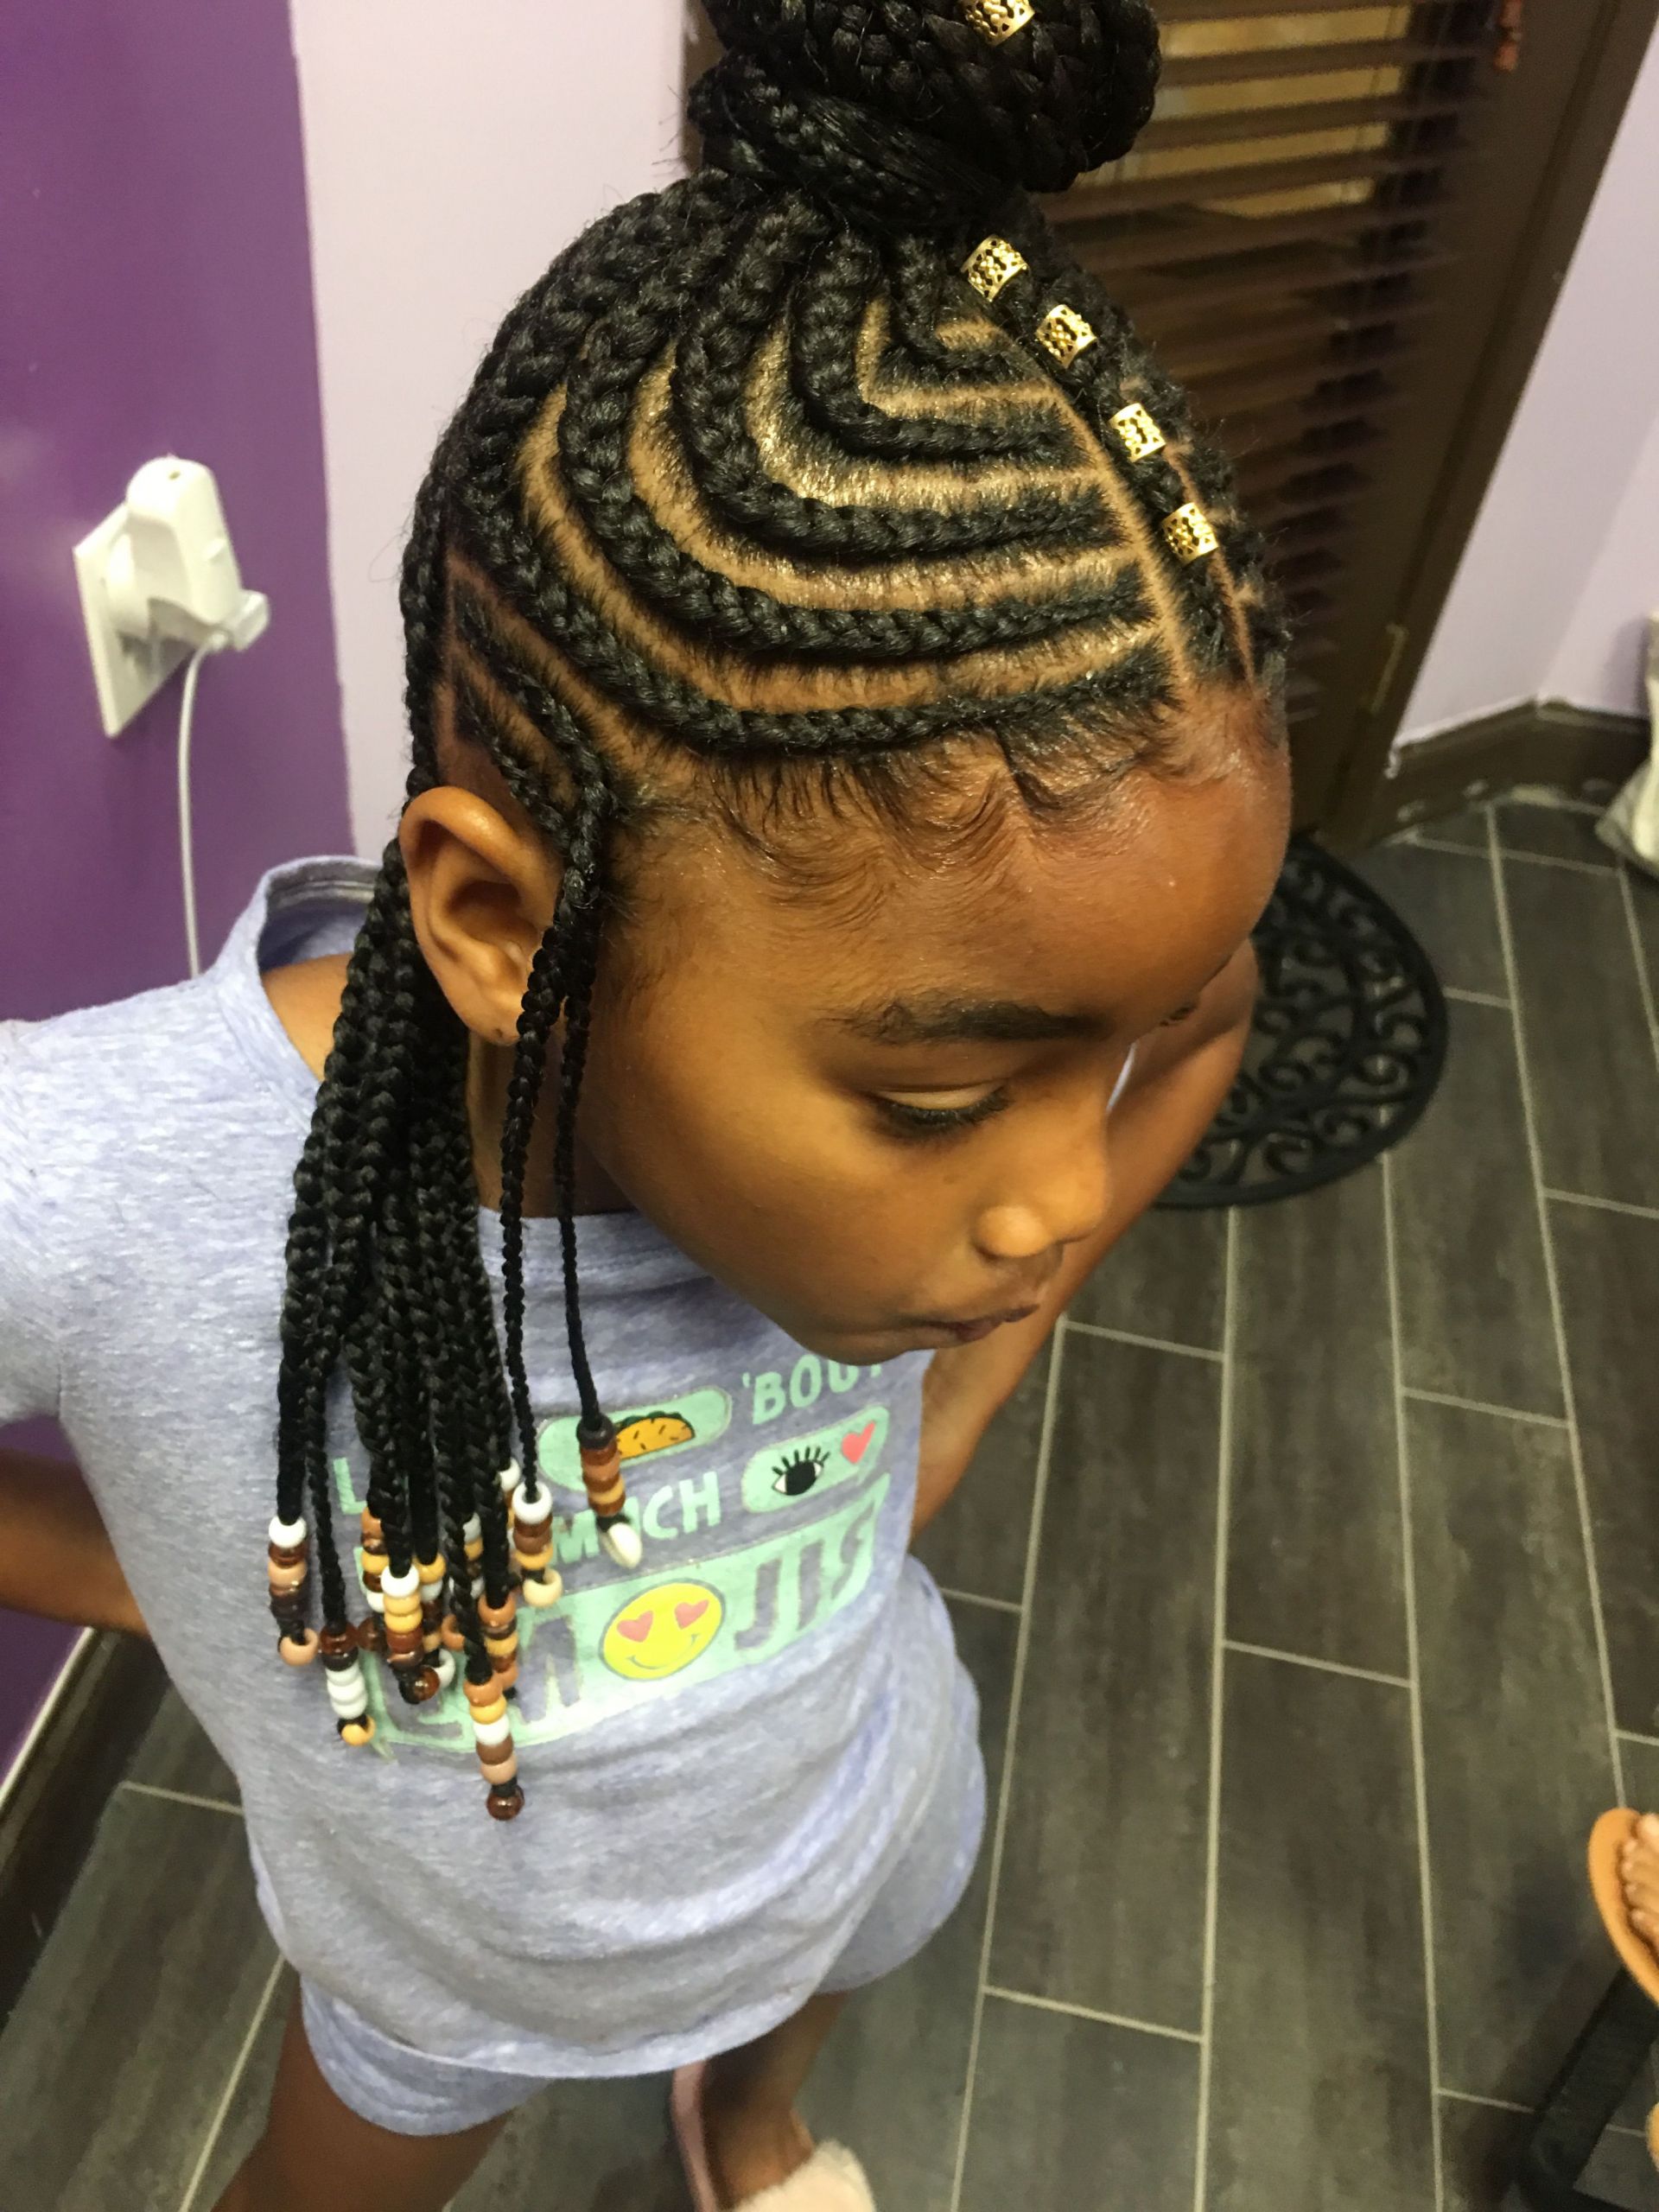 Hairstyles For Little Girls Braids
 She Used Flat Twists To Create Fabulous Summer Curls